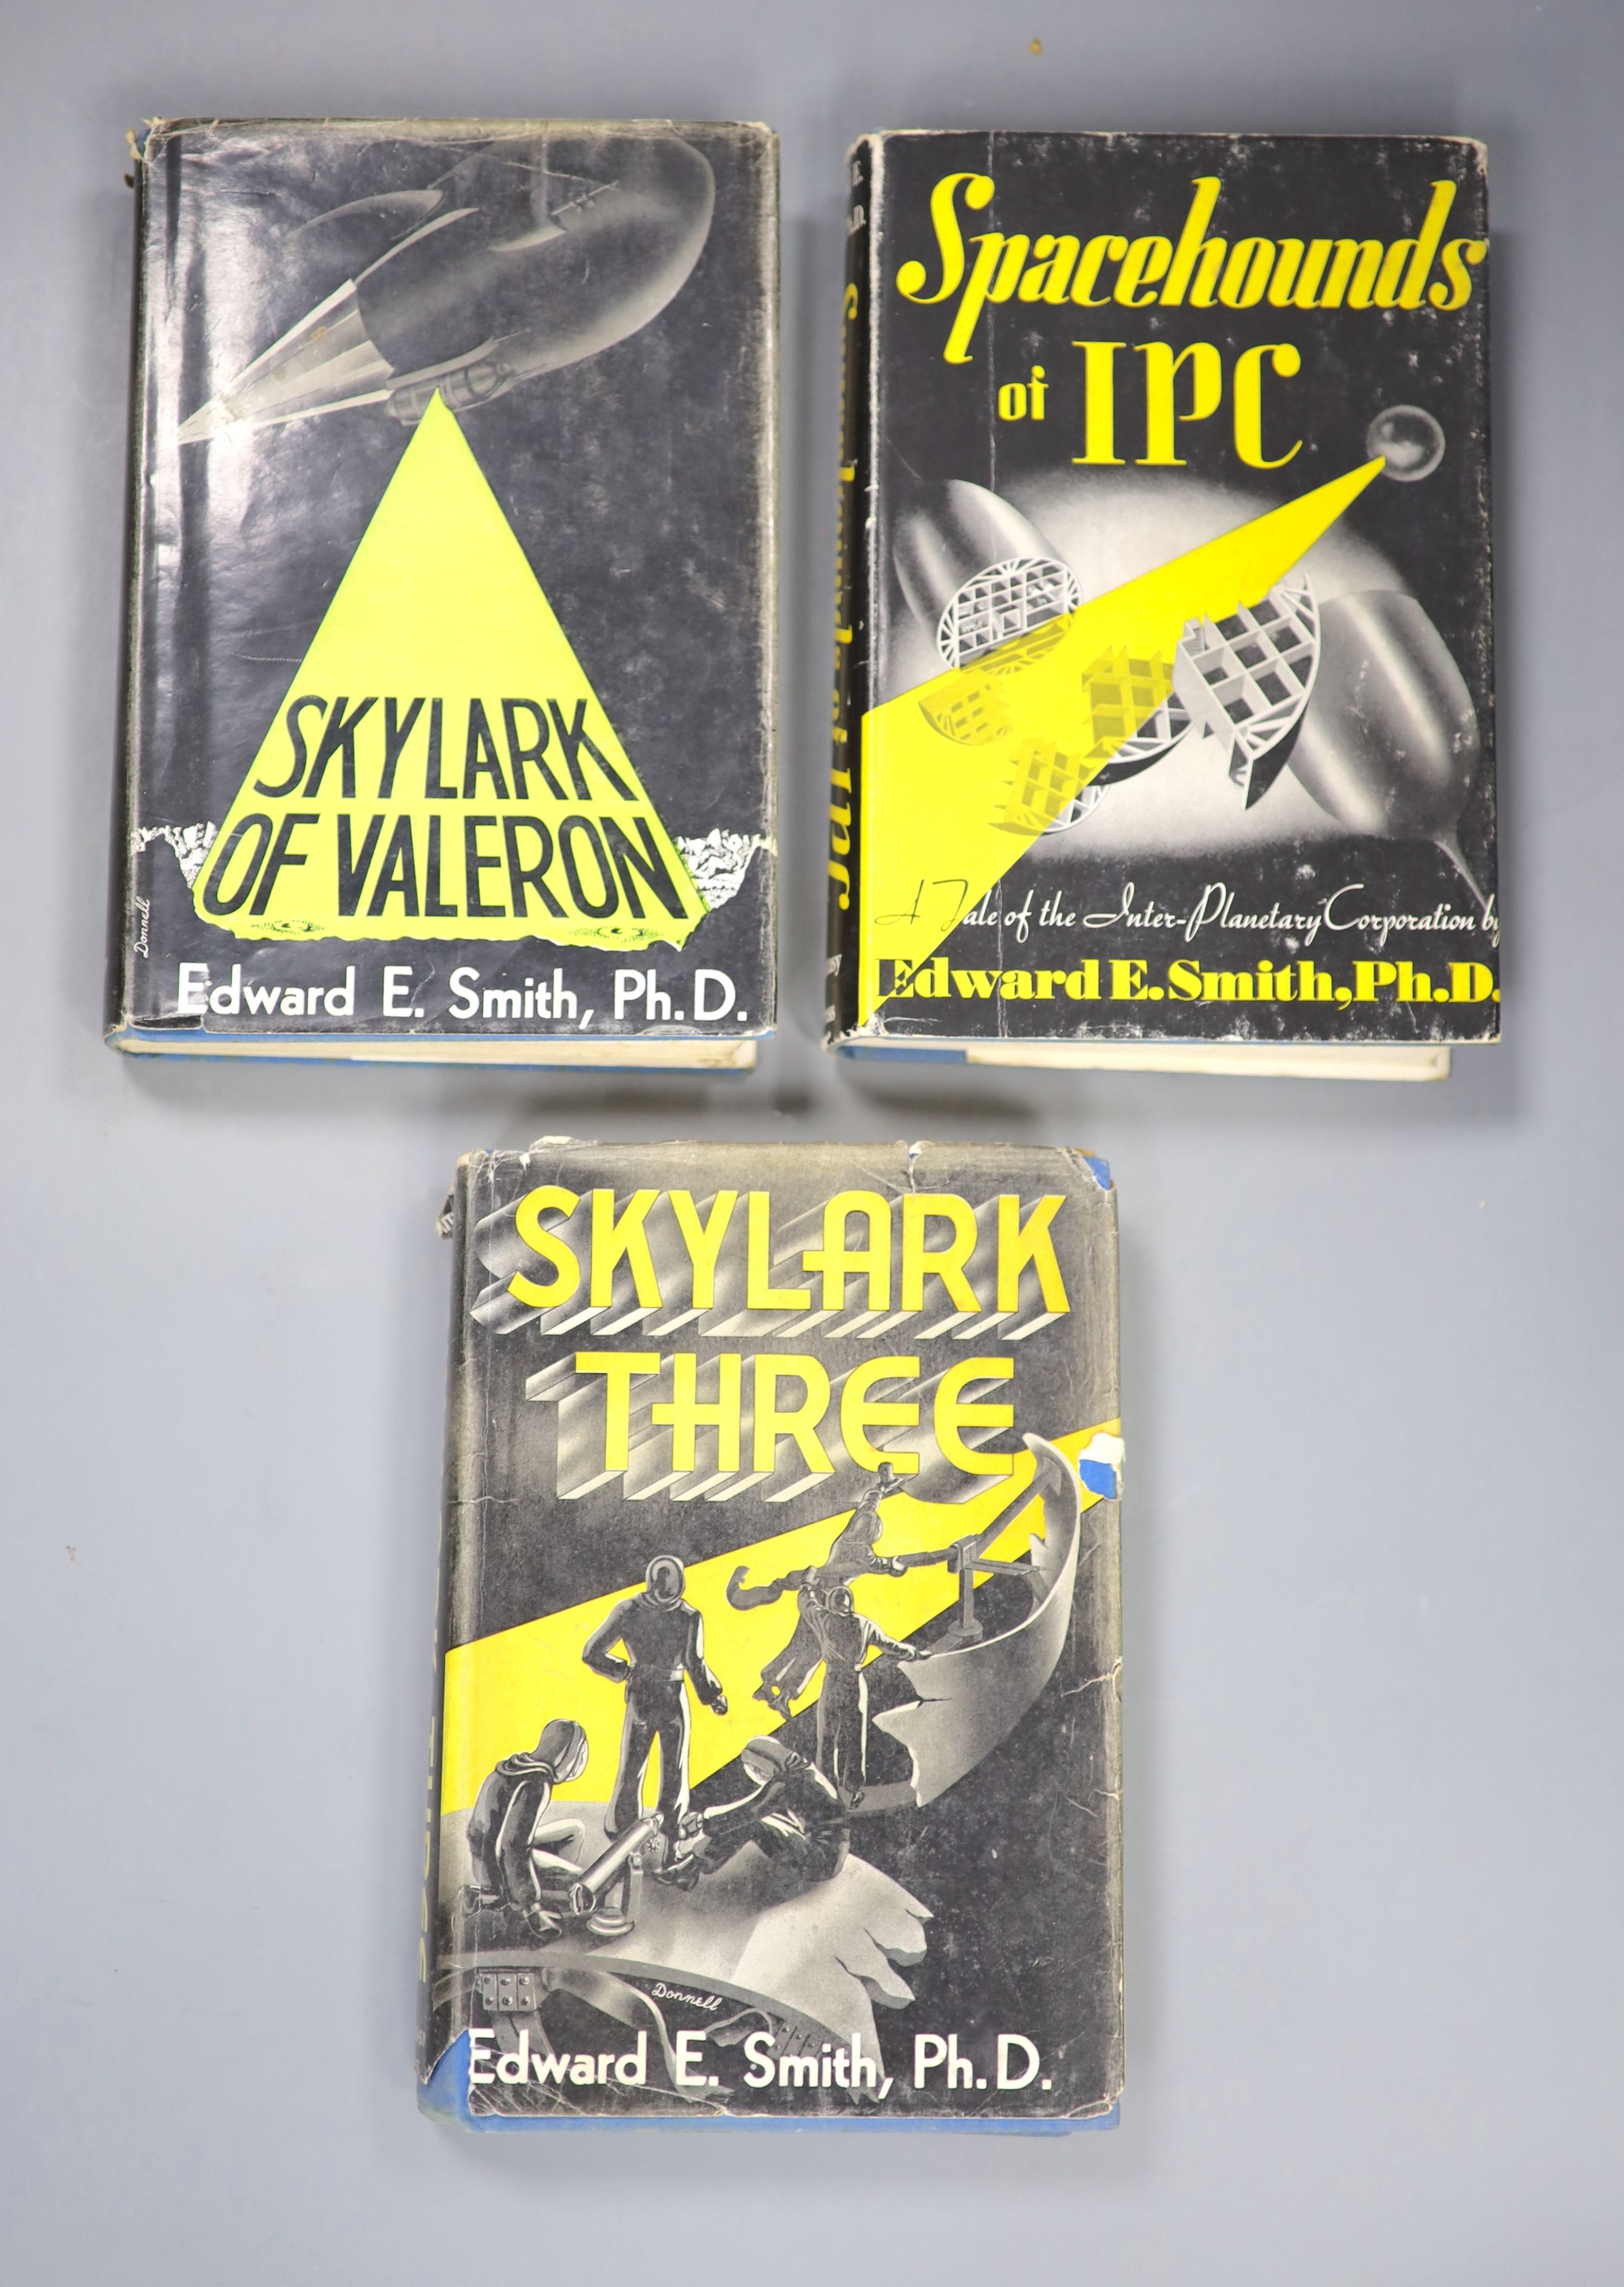 Smith, Edward E - Seven works - Spacehounds of IPC, 1st edition, with unclipped d/j, Fantasy Press, 1947; Skylark Three, 1st edition, with unclipped d/j, Fantasy Press, 1948; Skylark of Valeron, 1st edition, with unclipp